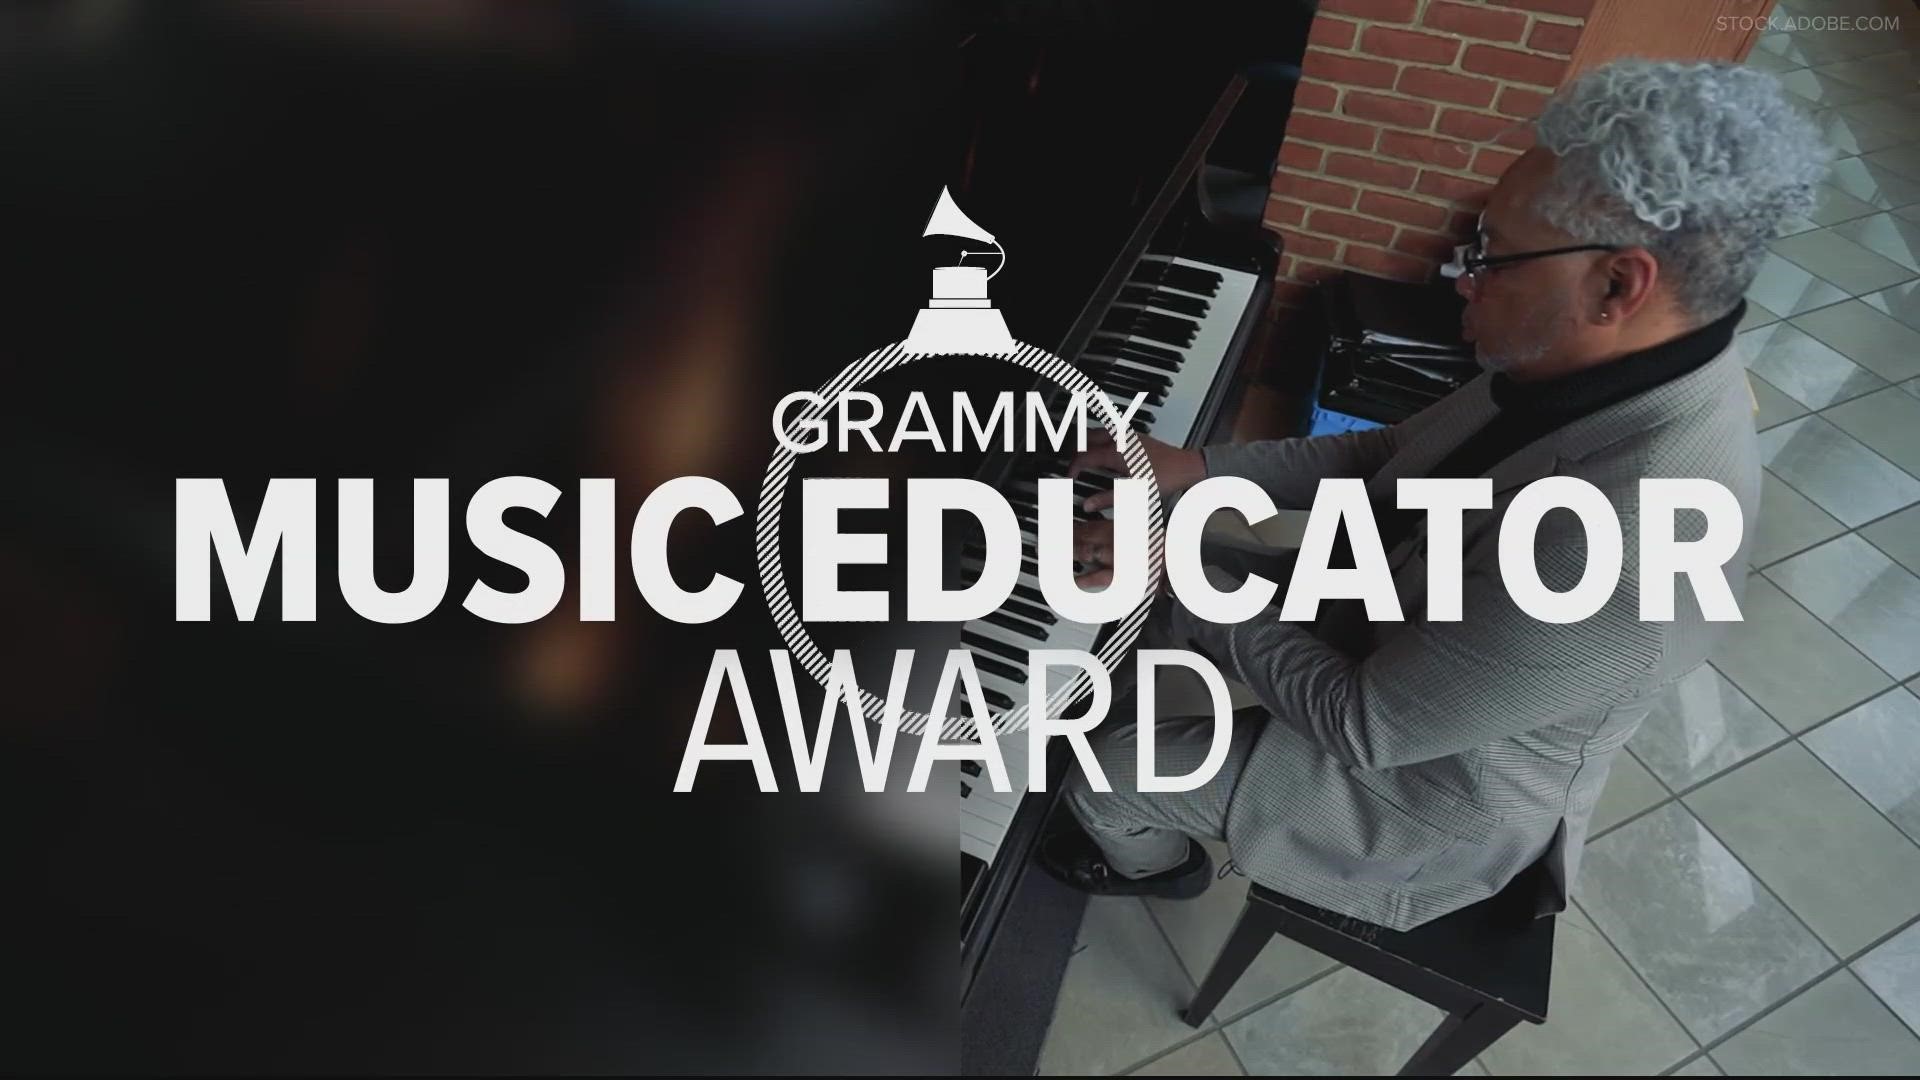 An incredibly talented Laurel teacher who was up for Grammy music educator of the year. Bruce Leshan is among the thousands inspired by Tony Small.